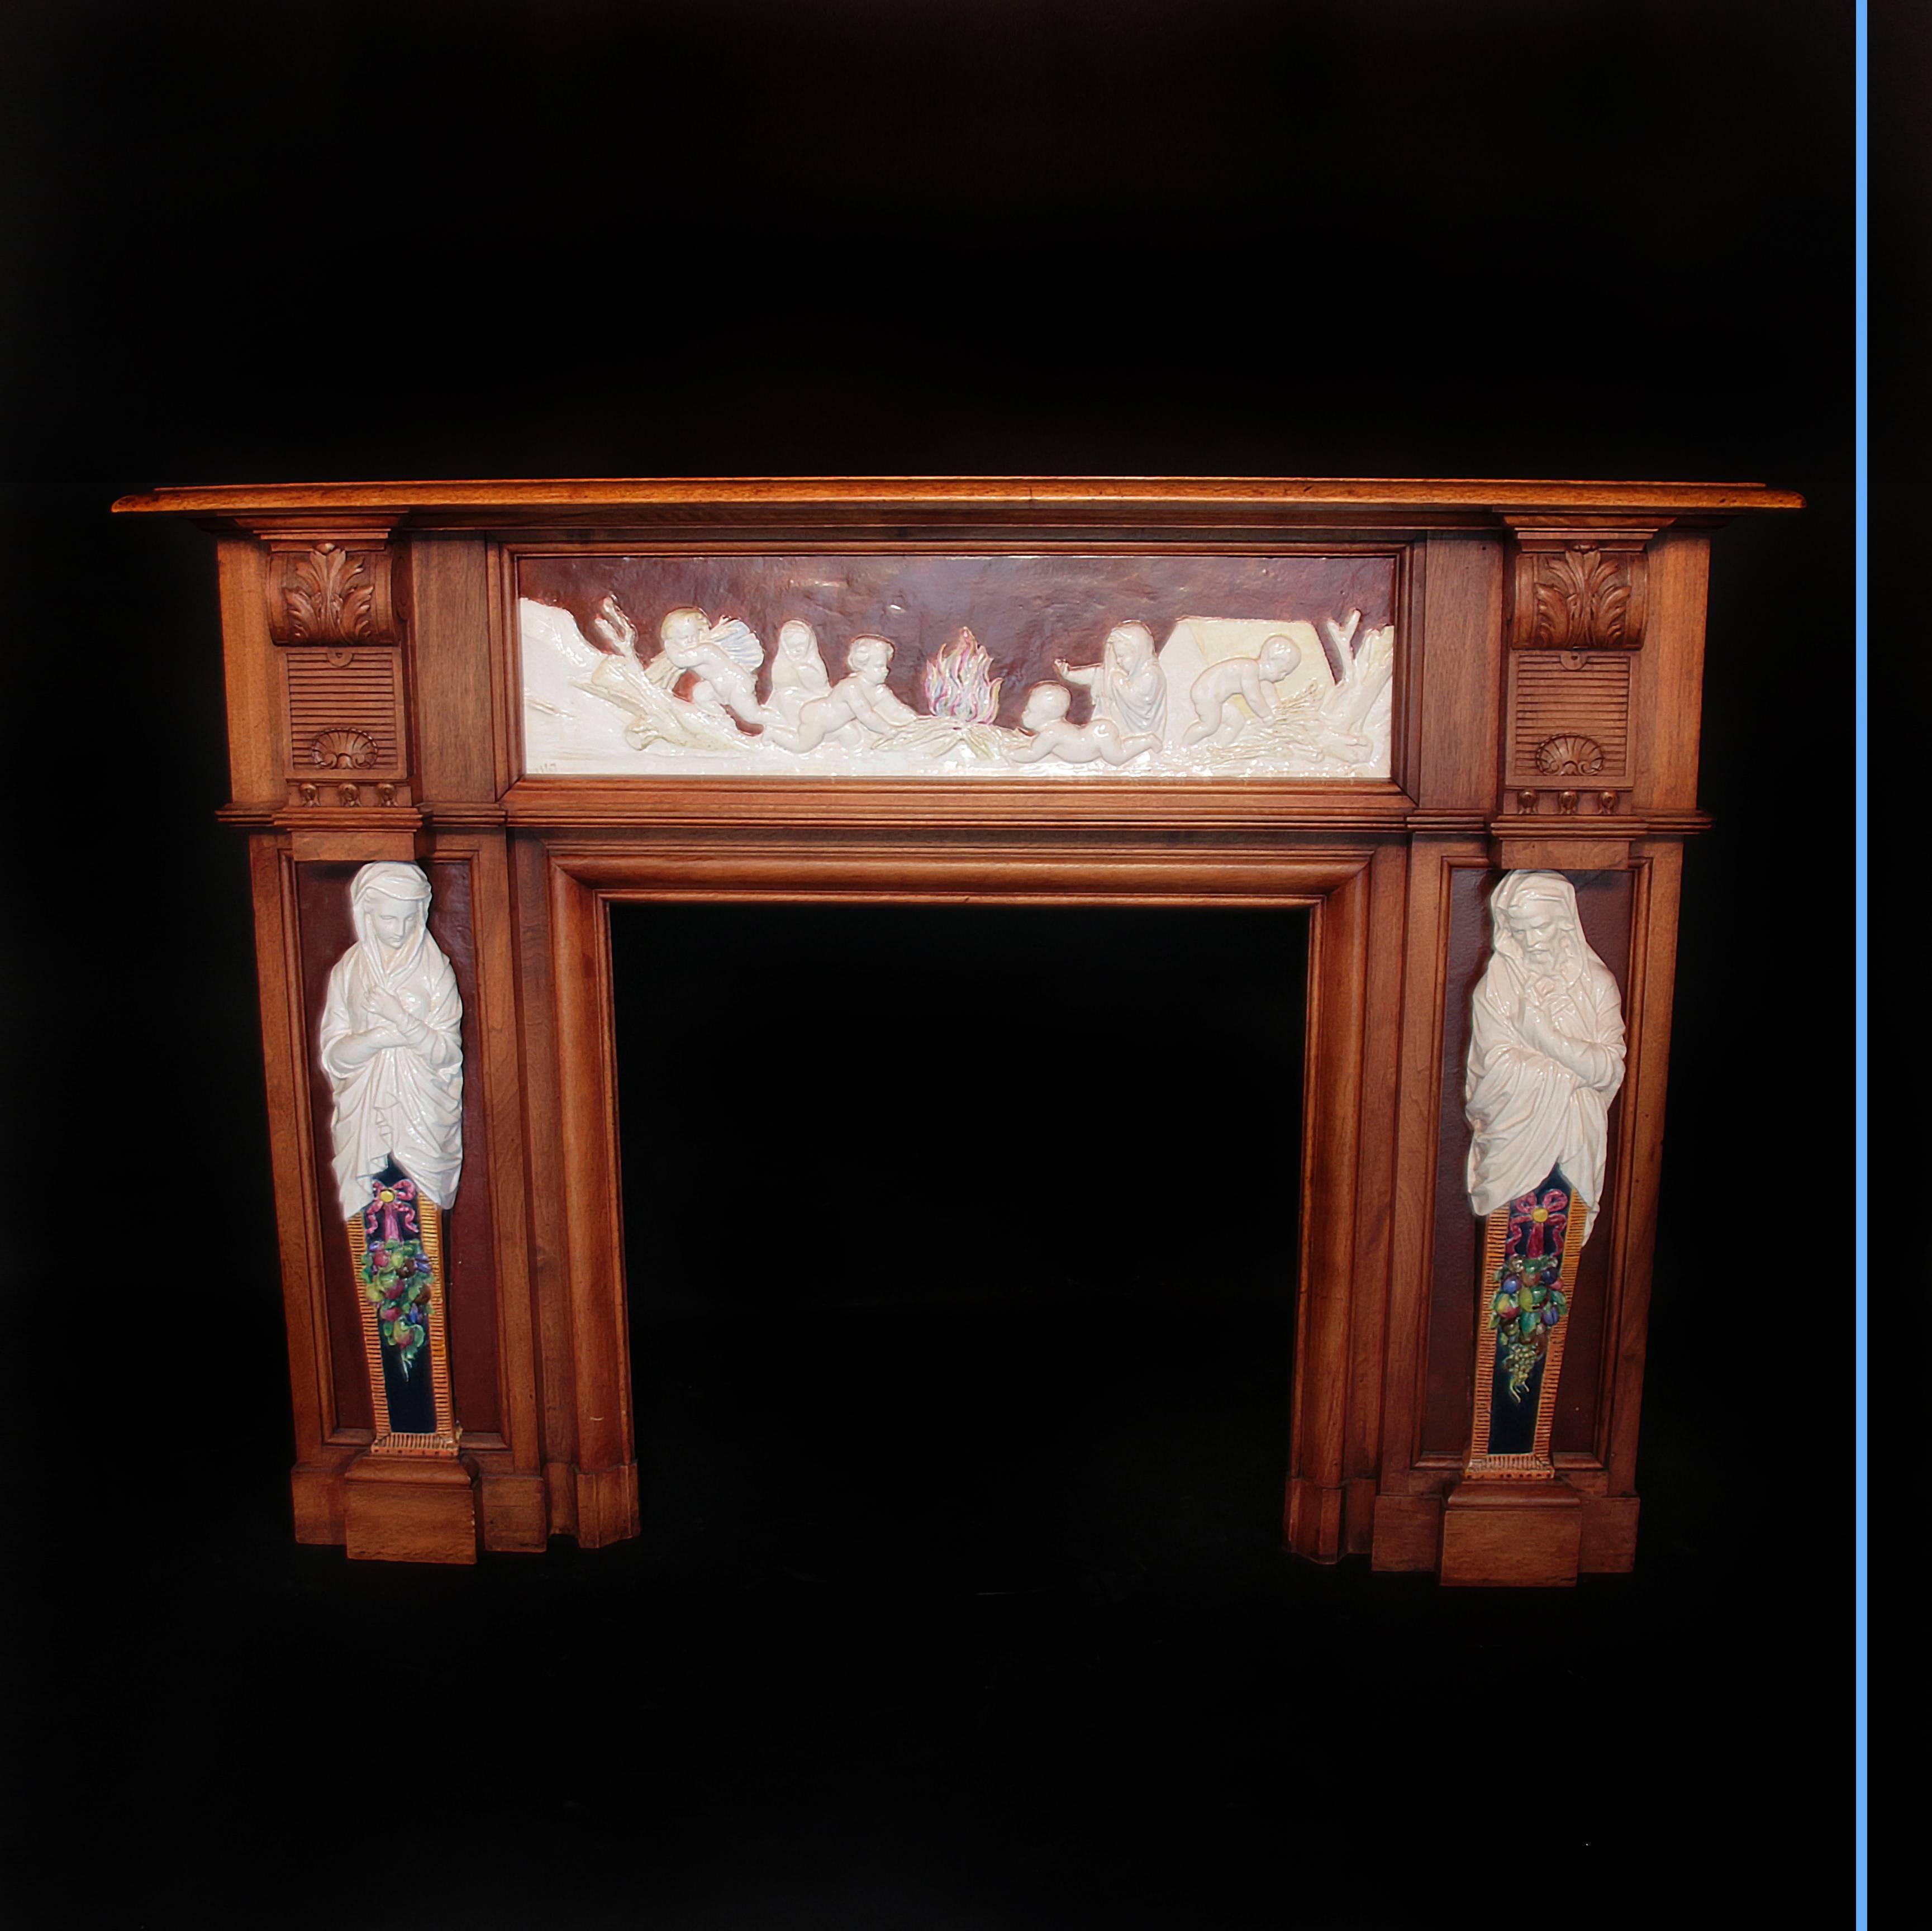 Delicate fireplace mantelpiece.
Carved walnut and ceramic,
19th century.
Measures: H 119 cm, W 164 cm, D 53.5 cm.
Hearth: H 75, W 75 cm.